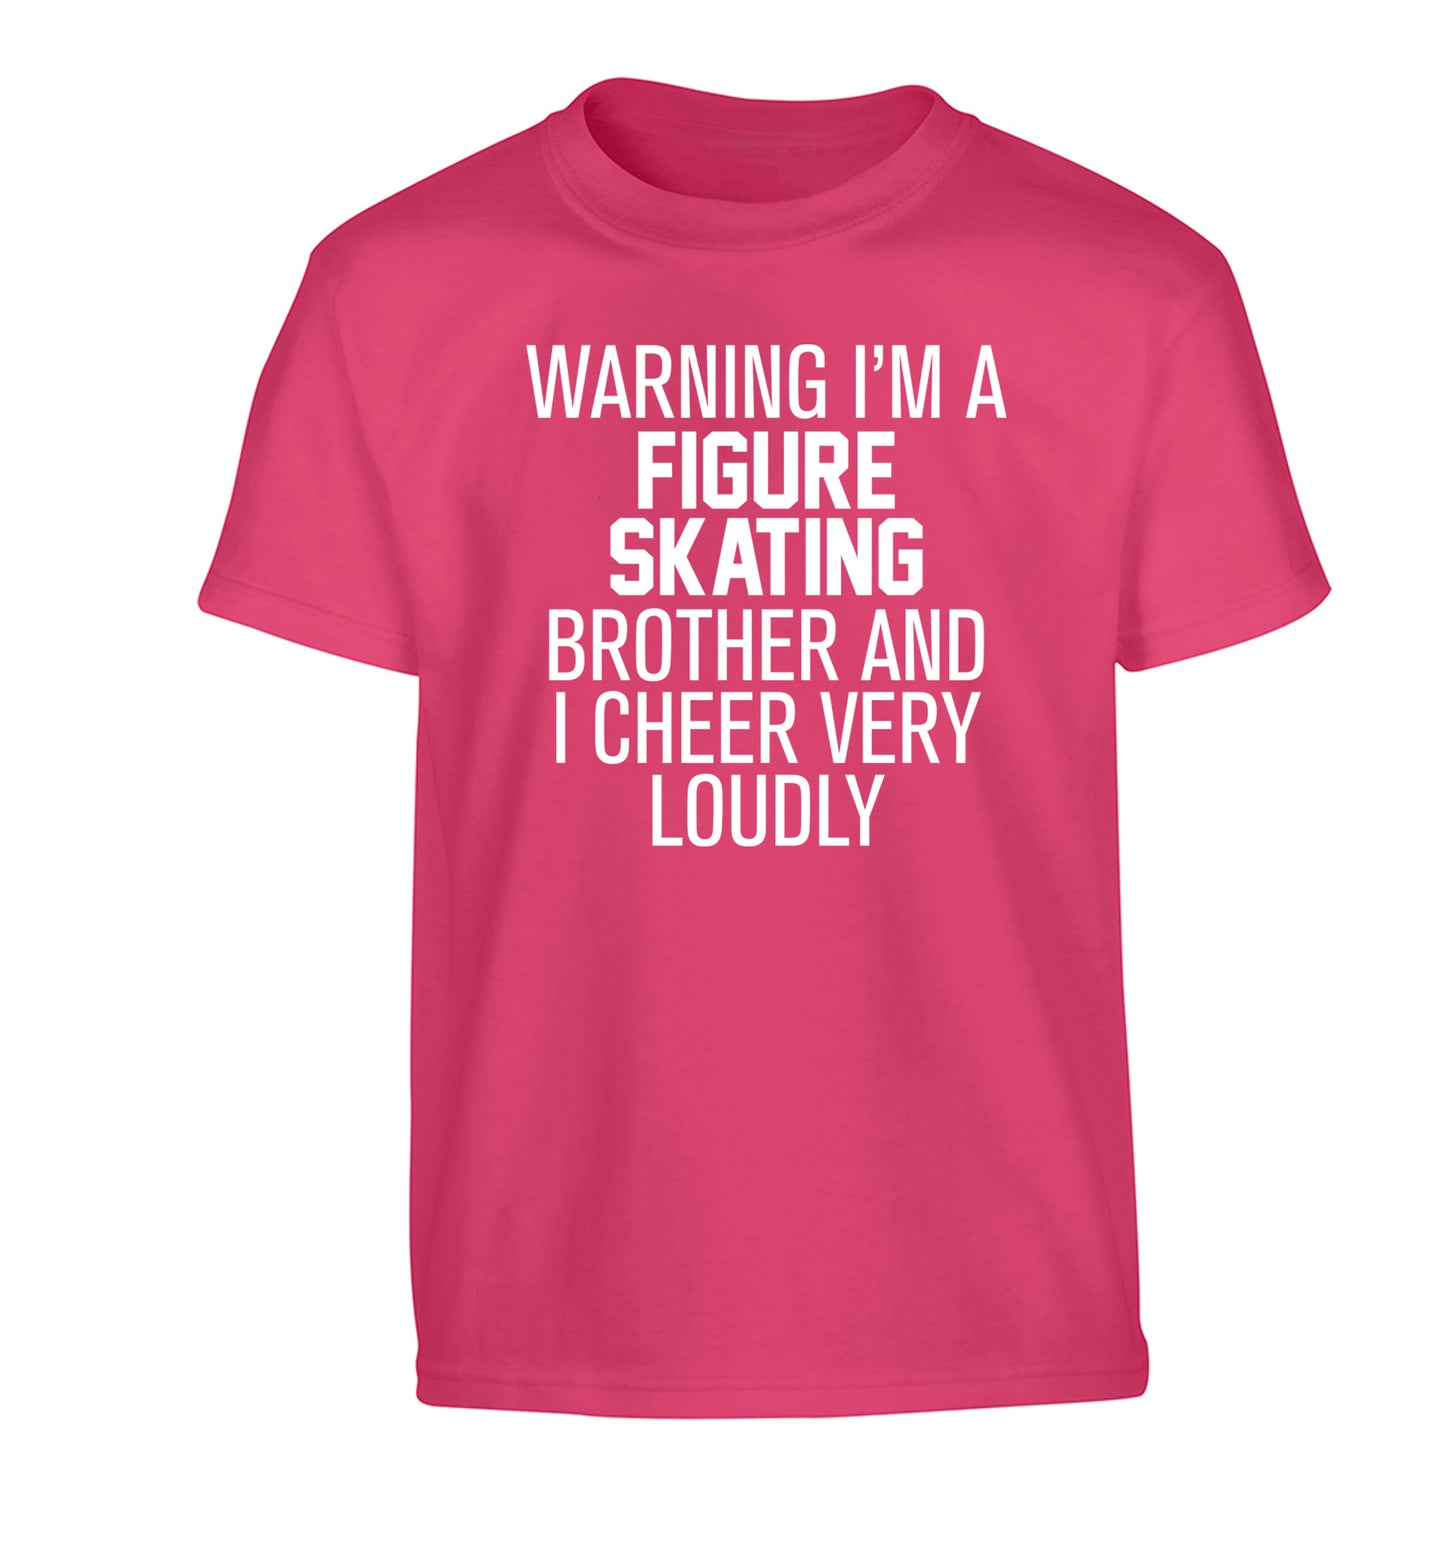 Warning I'm a figure skating brother and I cheer very loudly Children's pink Tshirt 12-14 Years